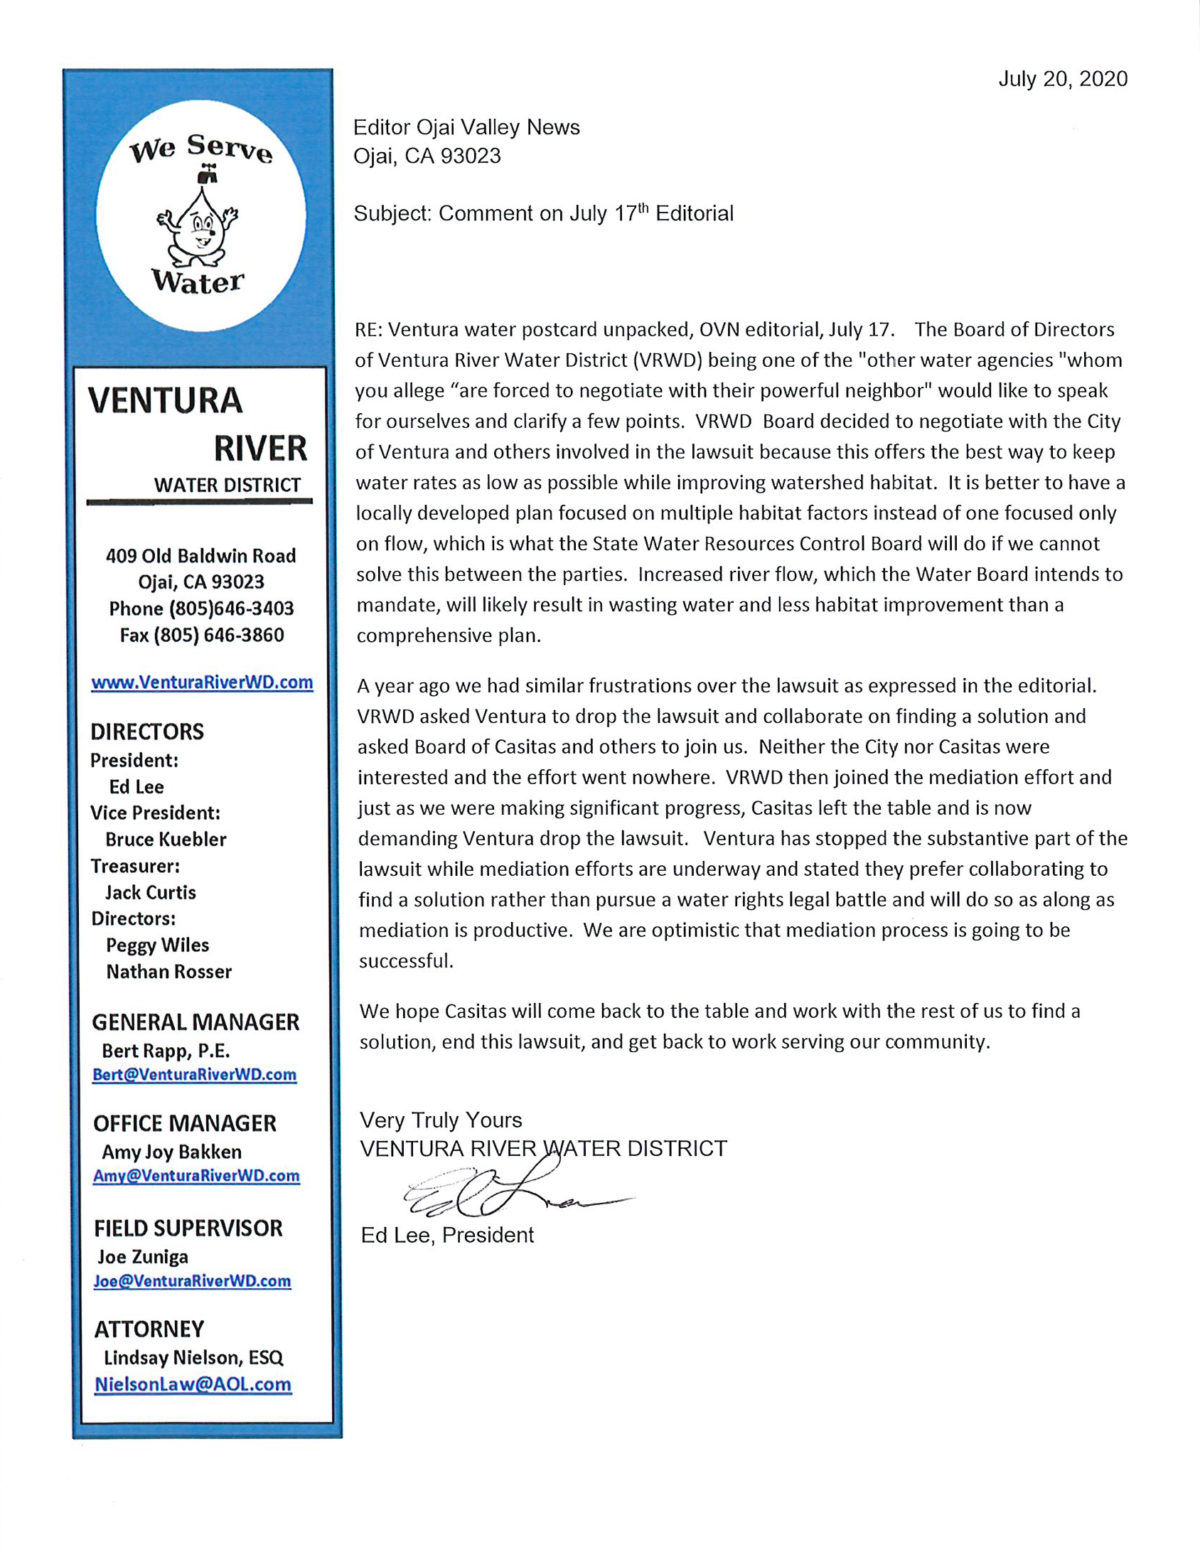 statement-from-ventura-river-water-district-supporting-collaborative